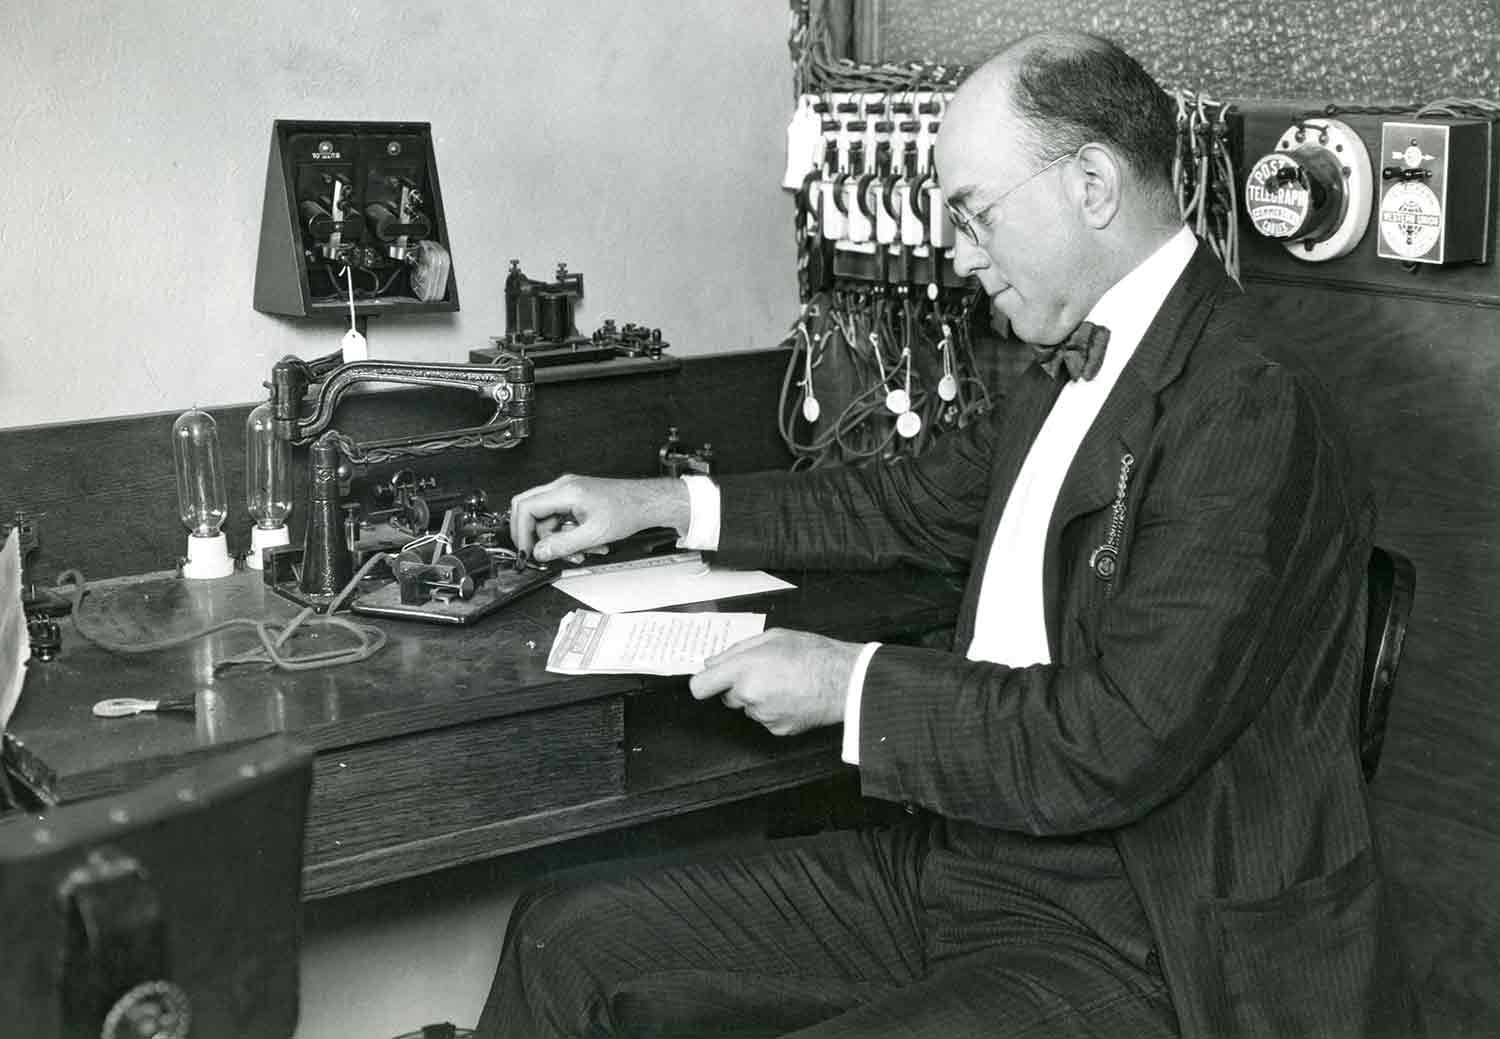 A man in a suit and bowtie looks at a message on a piece of paper while using a telegraph machine.